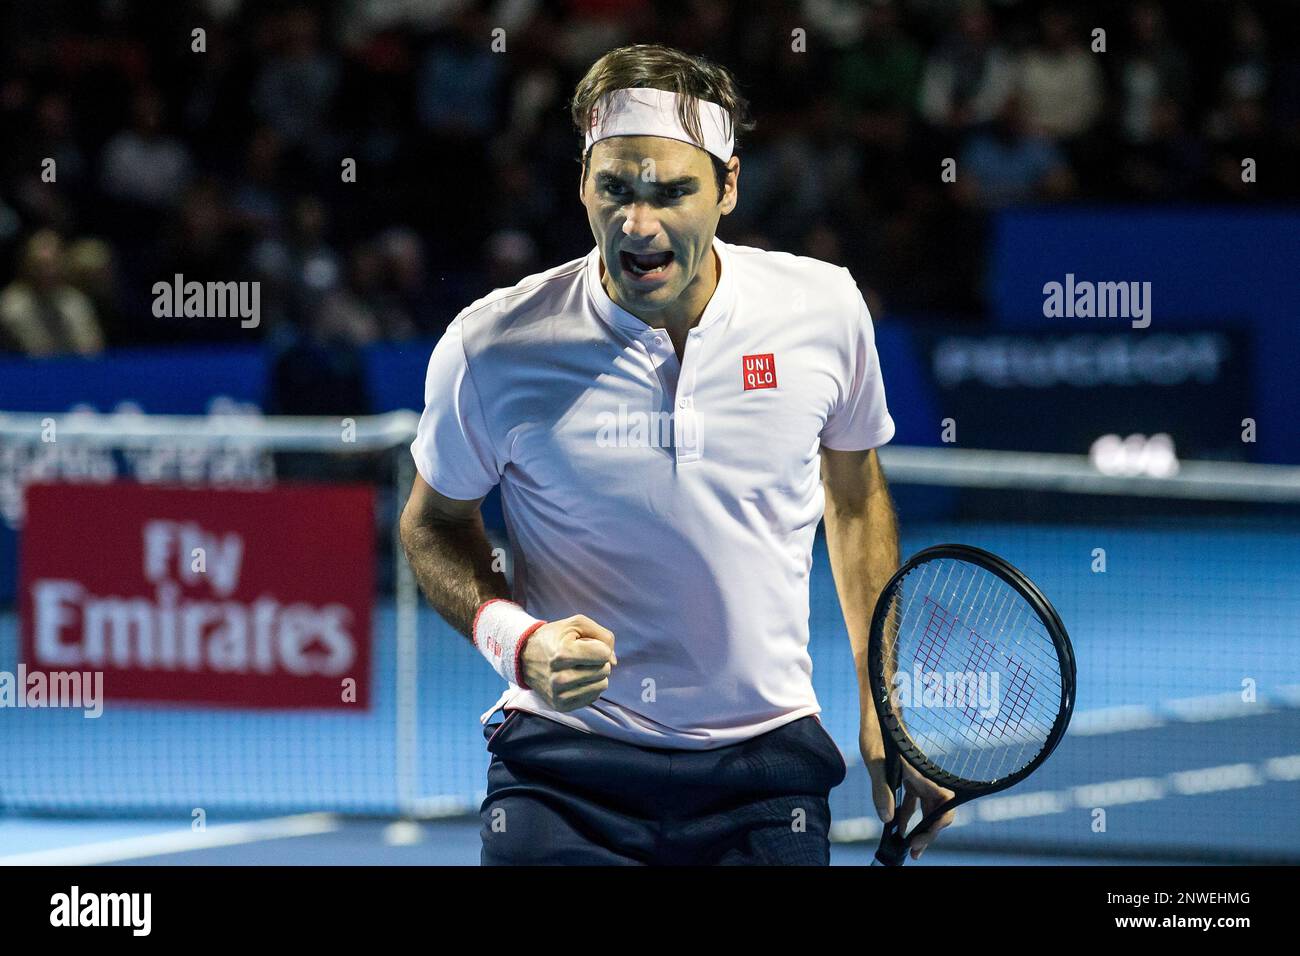 Switzerland's Roger Federer reacts during his final match against Romania's  Marius Copil at the Swiss Indoors tennis tournament at the St. Jakobshalle  in Basel, Switzerland, on Sunday, Oct. 28, 2018. (Alexandra Wey/Keystone